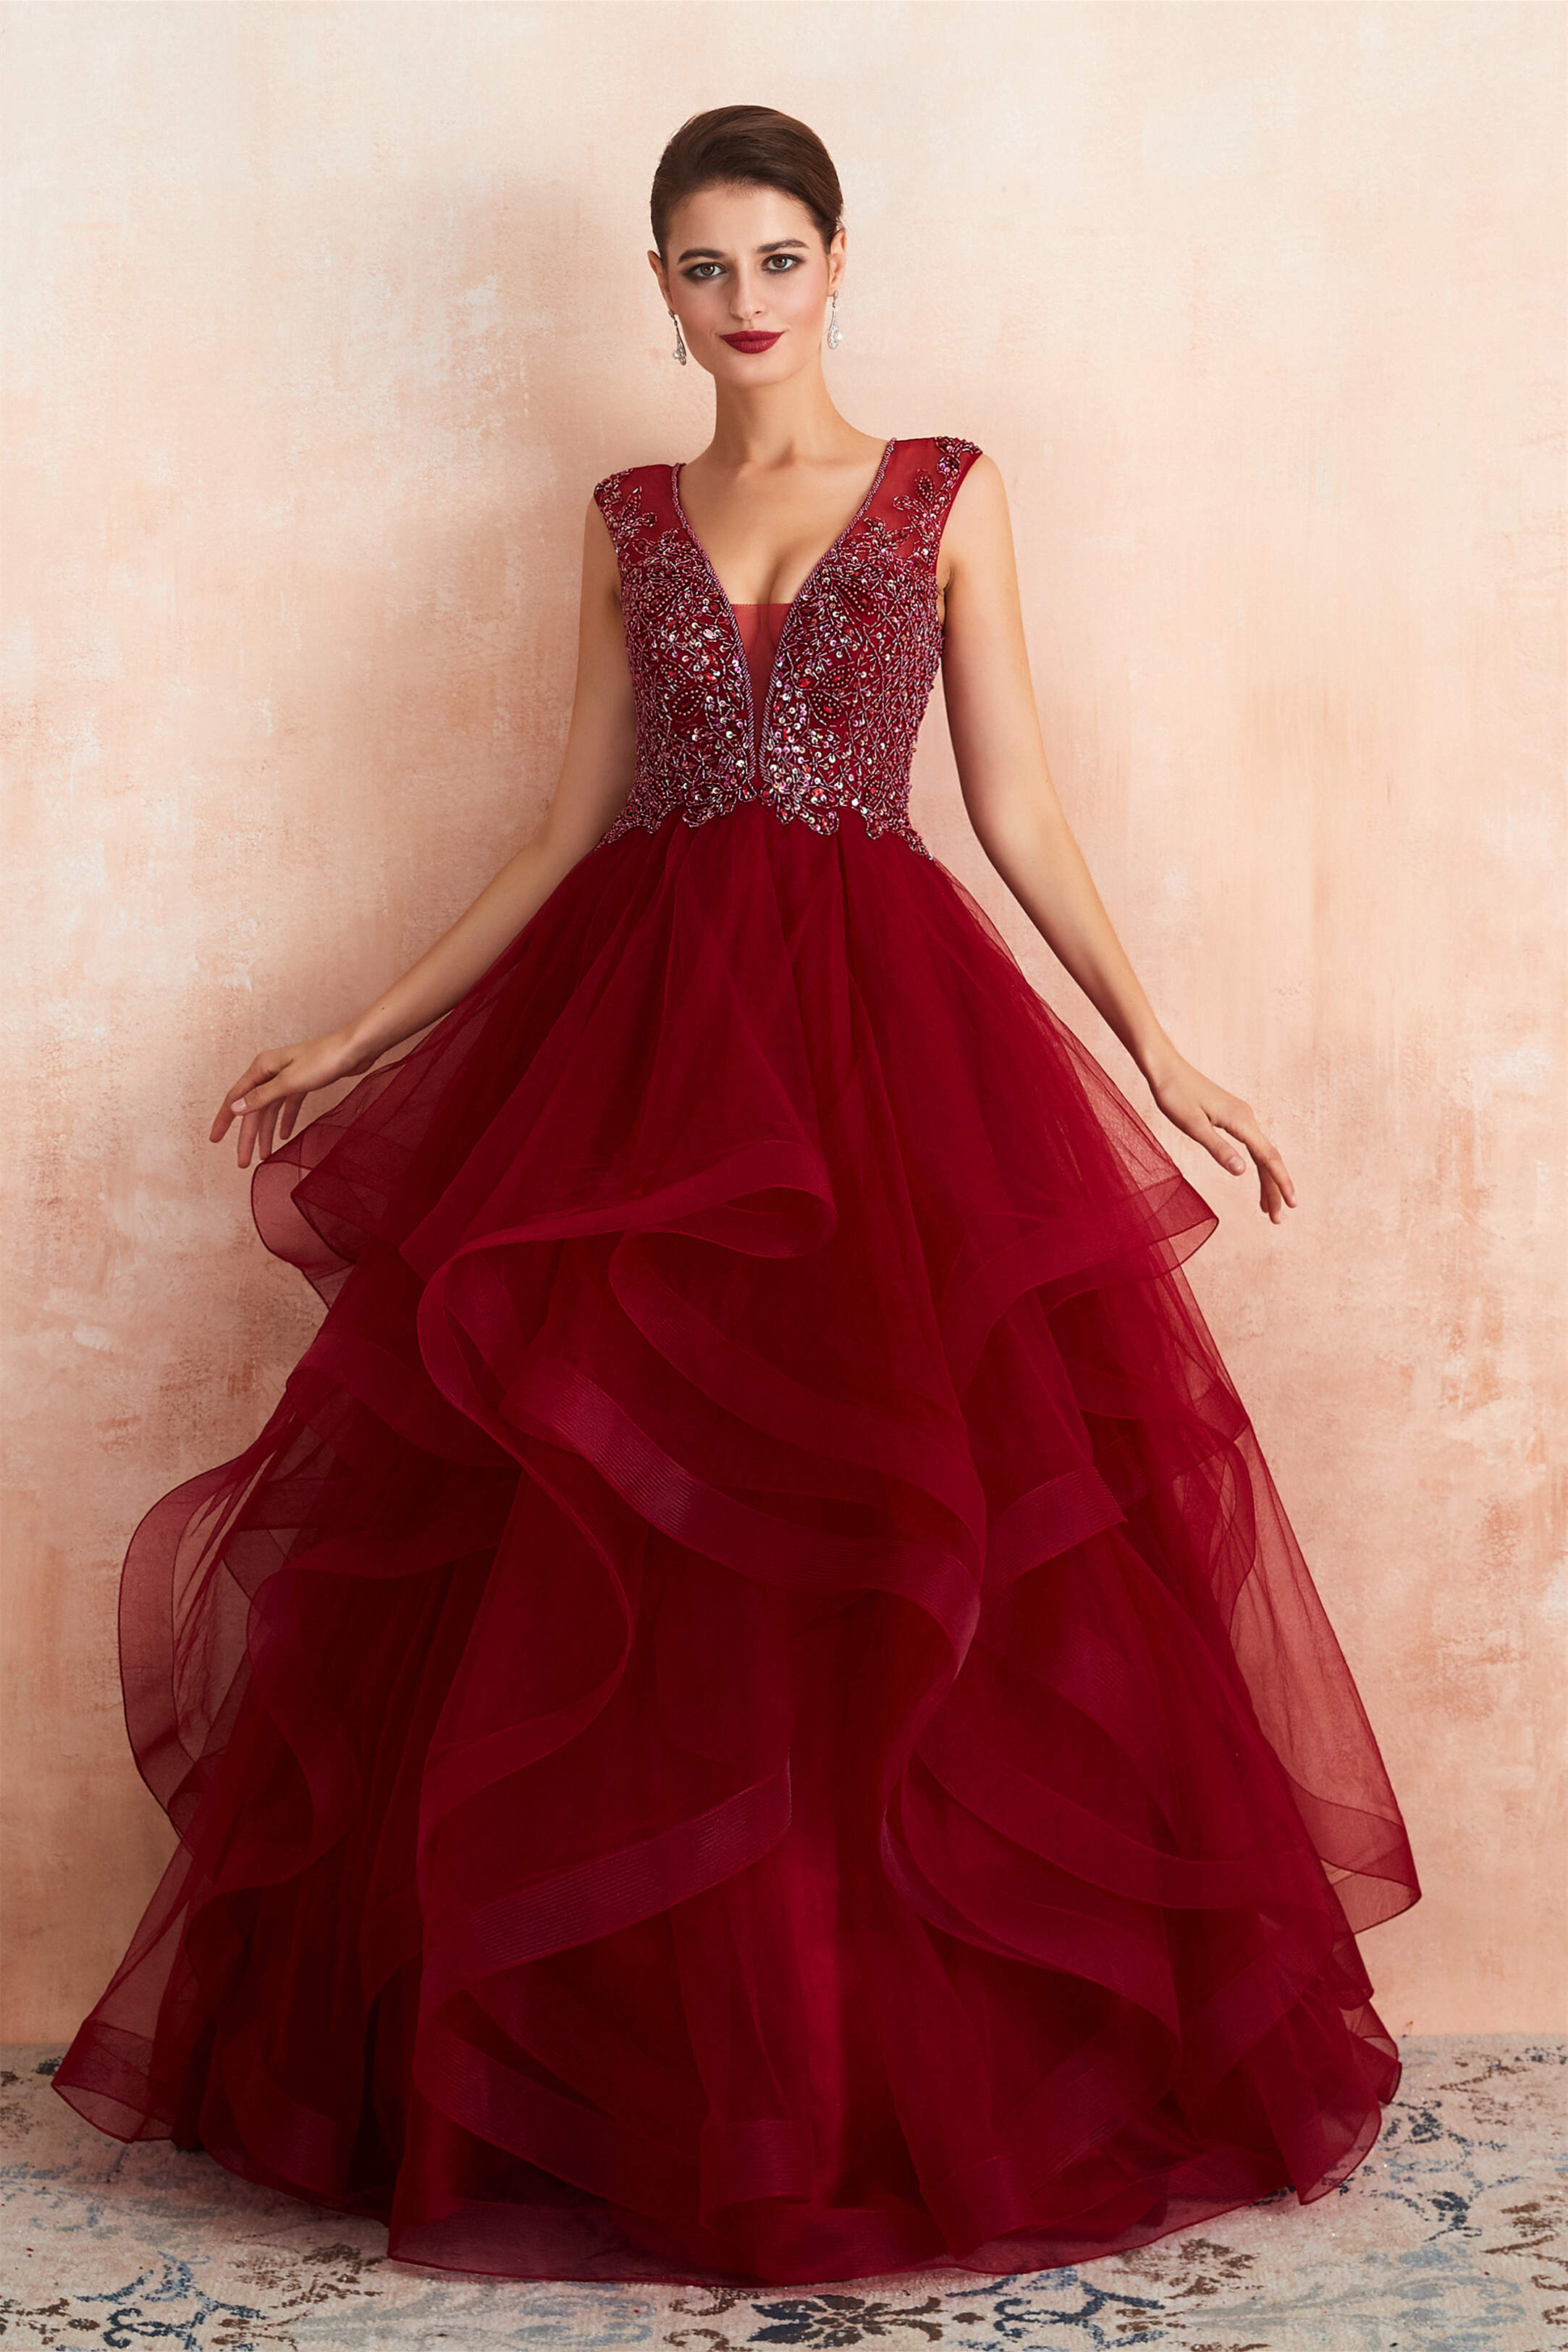 Burgundy Sleeveless Aline Puffy Tulle Corset Prom Dresses with Sequins Gowns, Prom Dress Uk